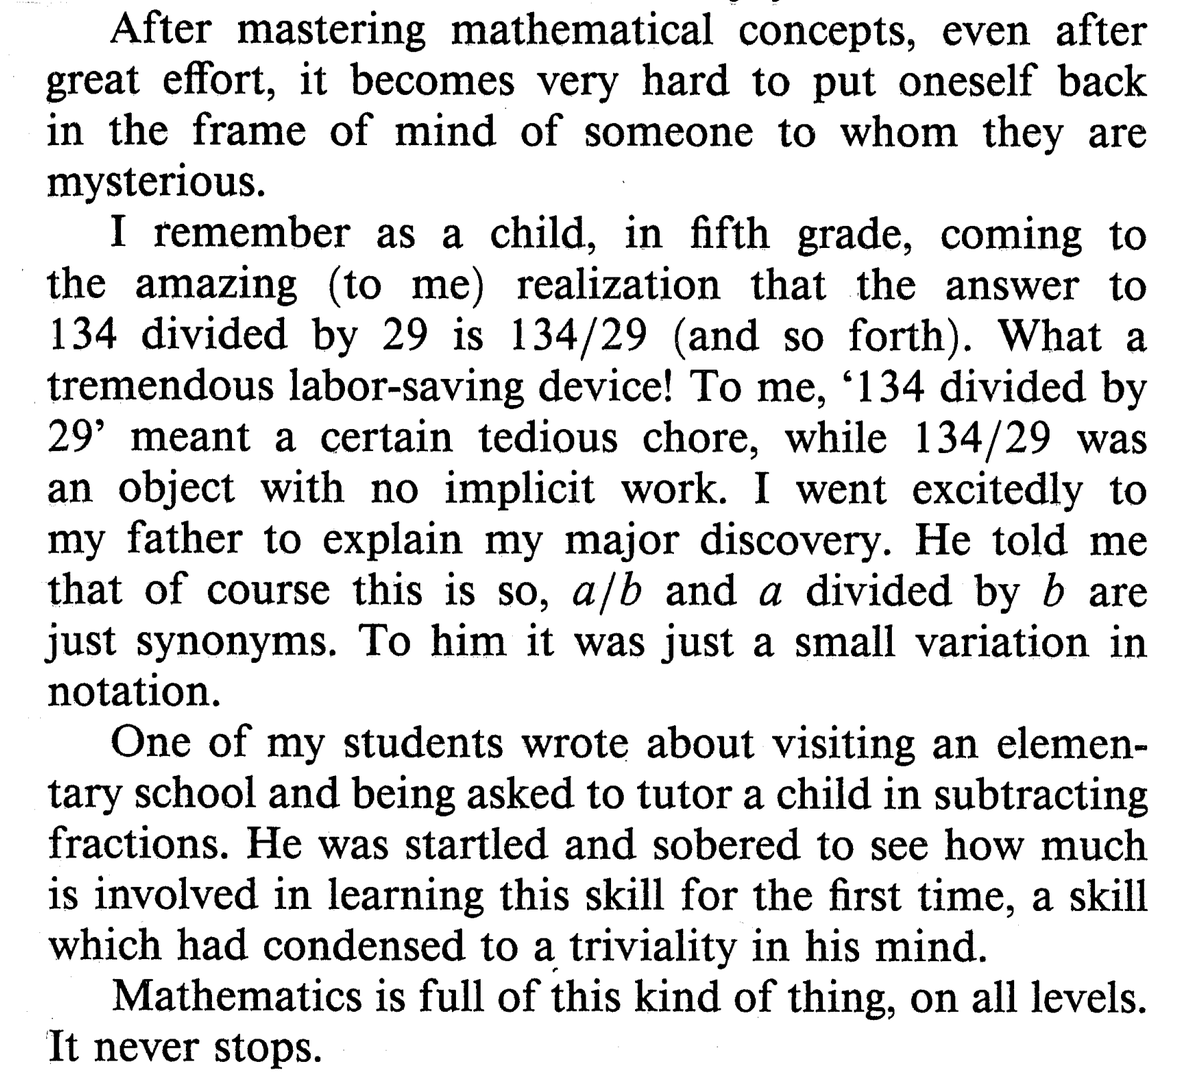 When explaining a concept, one of the hardest things to do is remember how you thought about the subject when you first encountered it. (This is an excerpt from an essay written by William Thurston:)